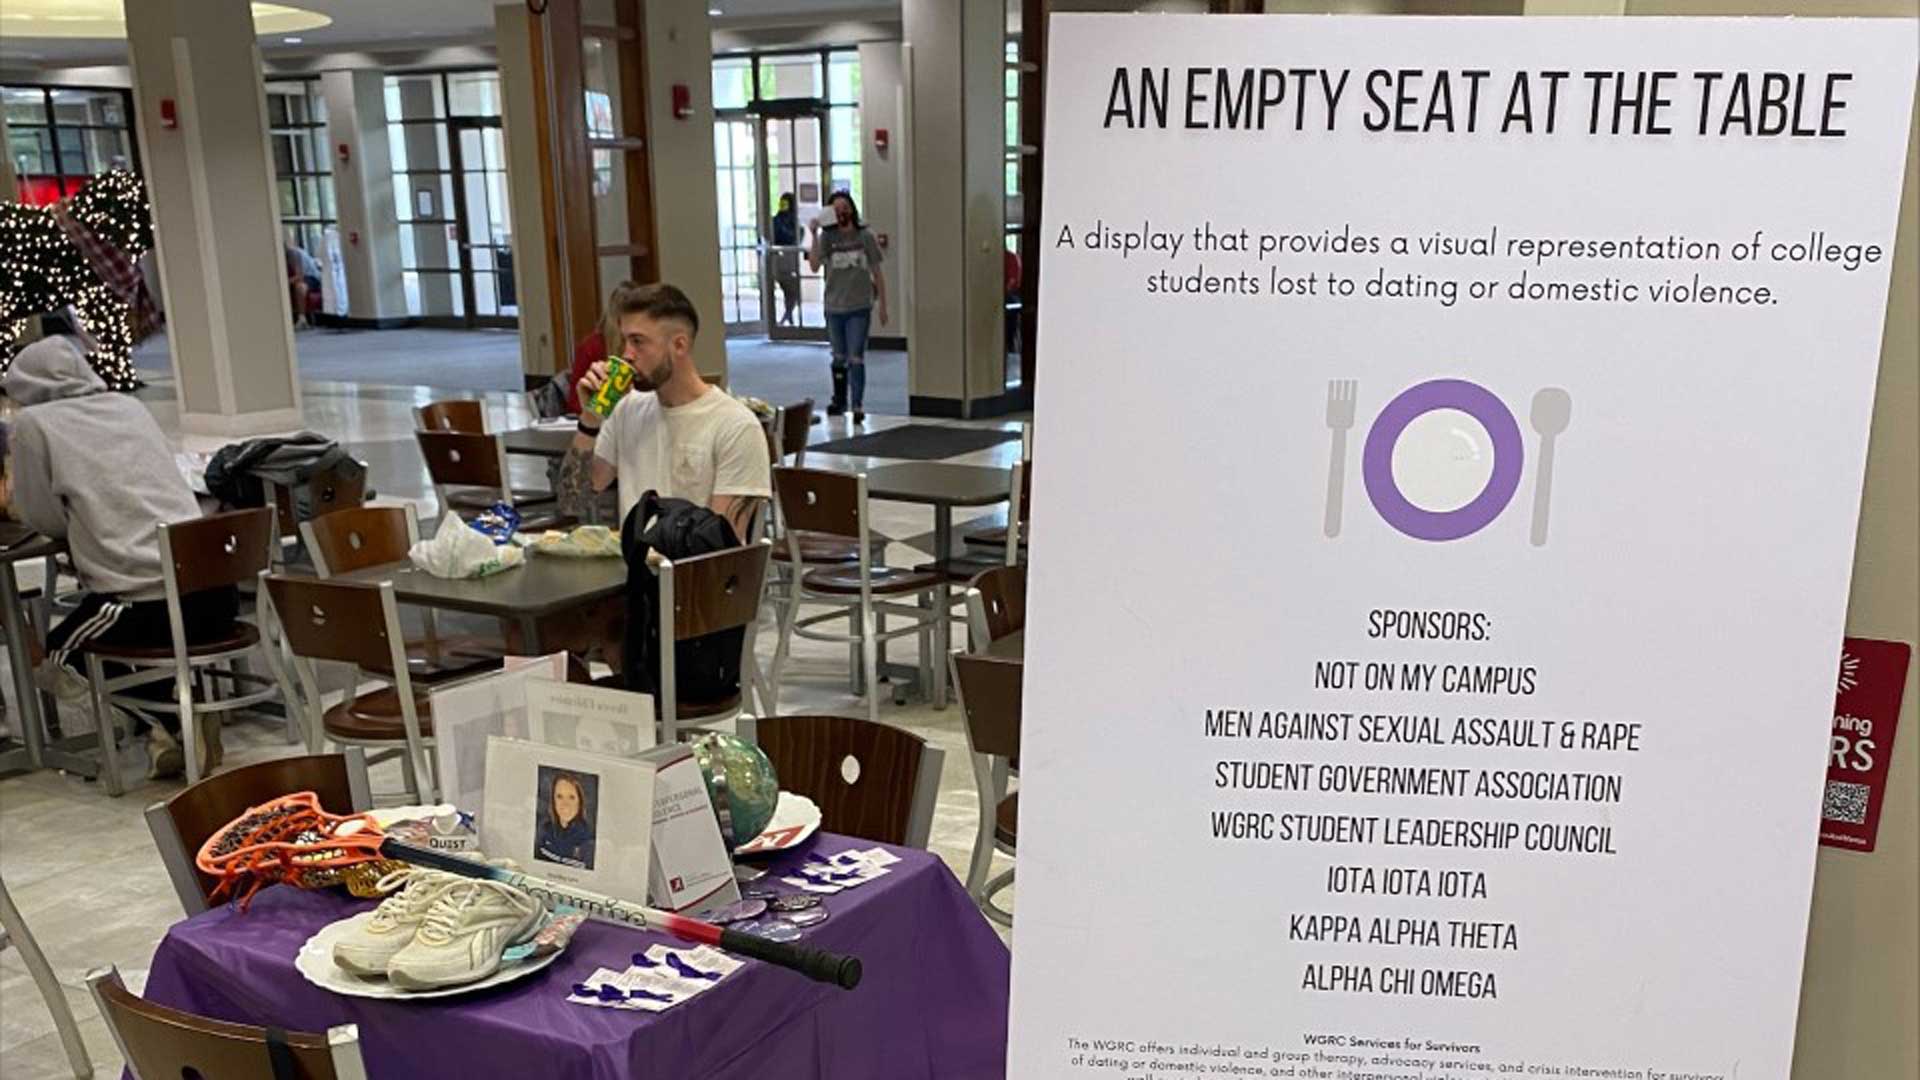 an empty table with a purple tablecloth set up in a dining hall to raise awareness about domestic violence